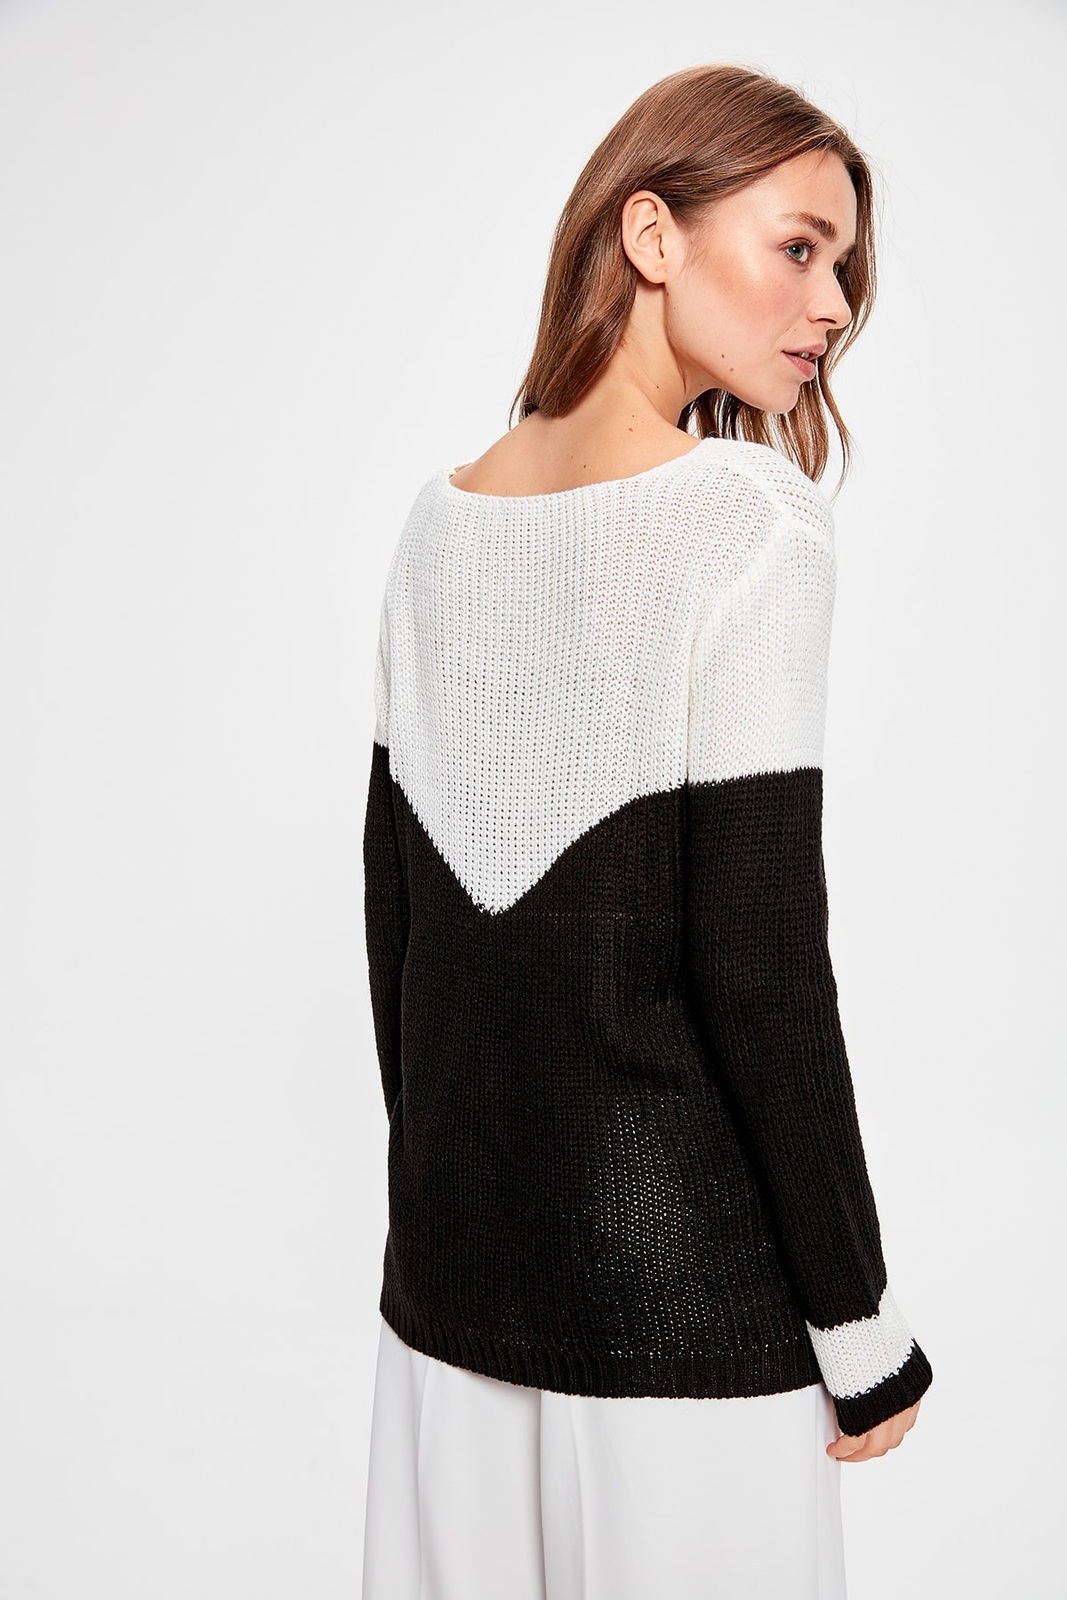 New white black color block knit women sweater knitted jumper warm ...